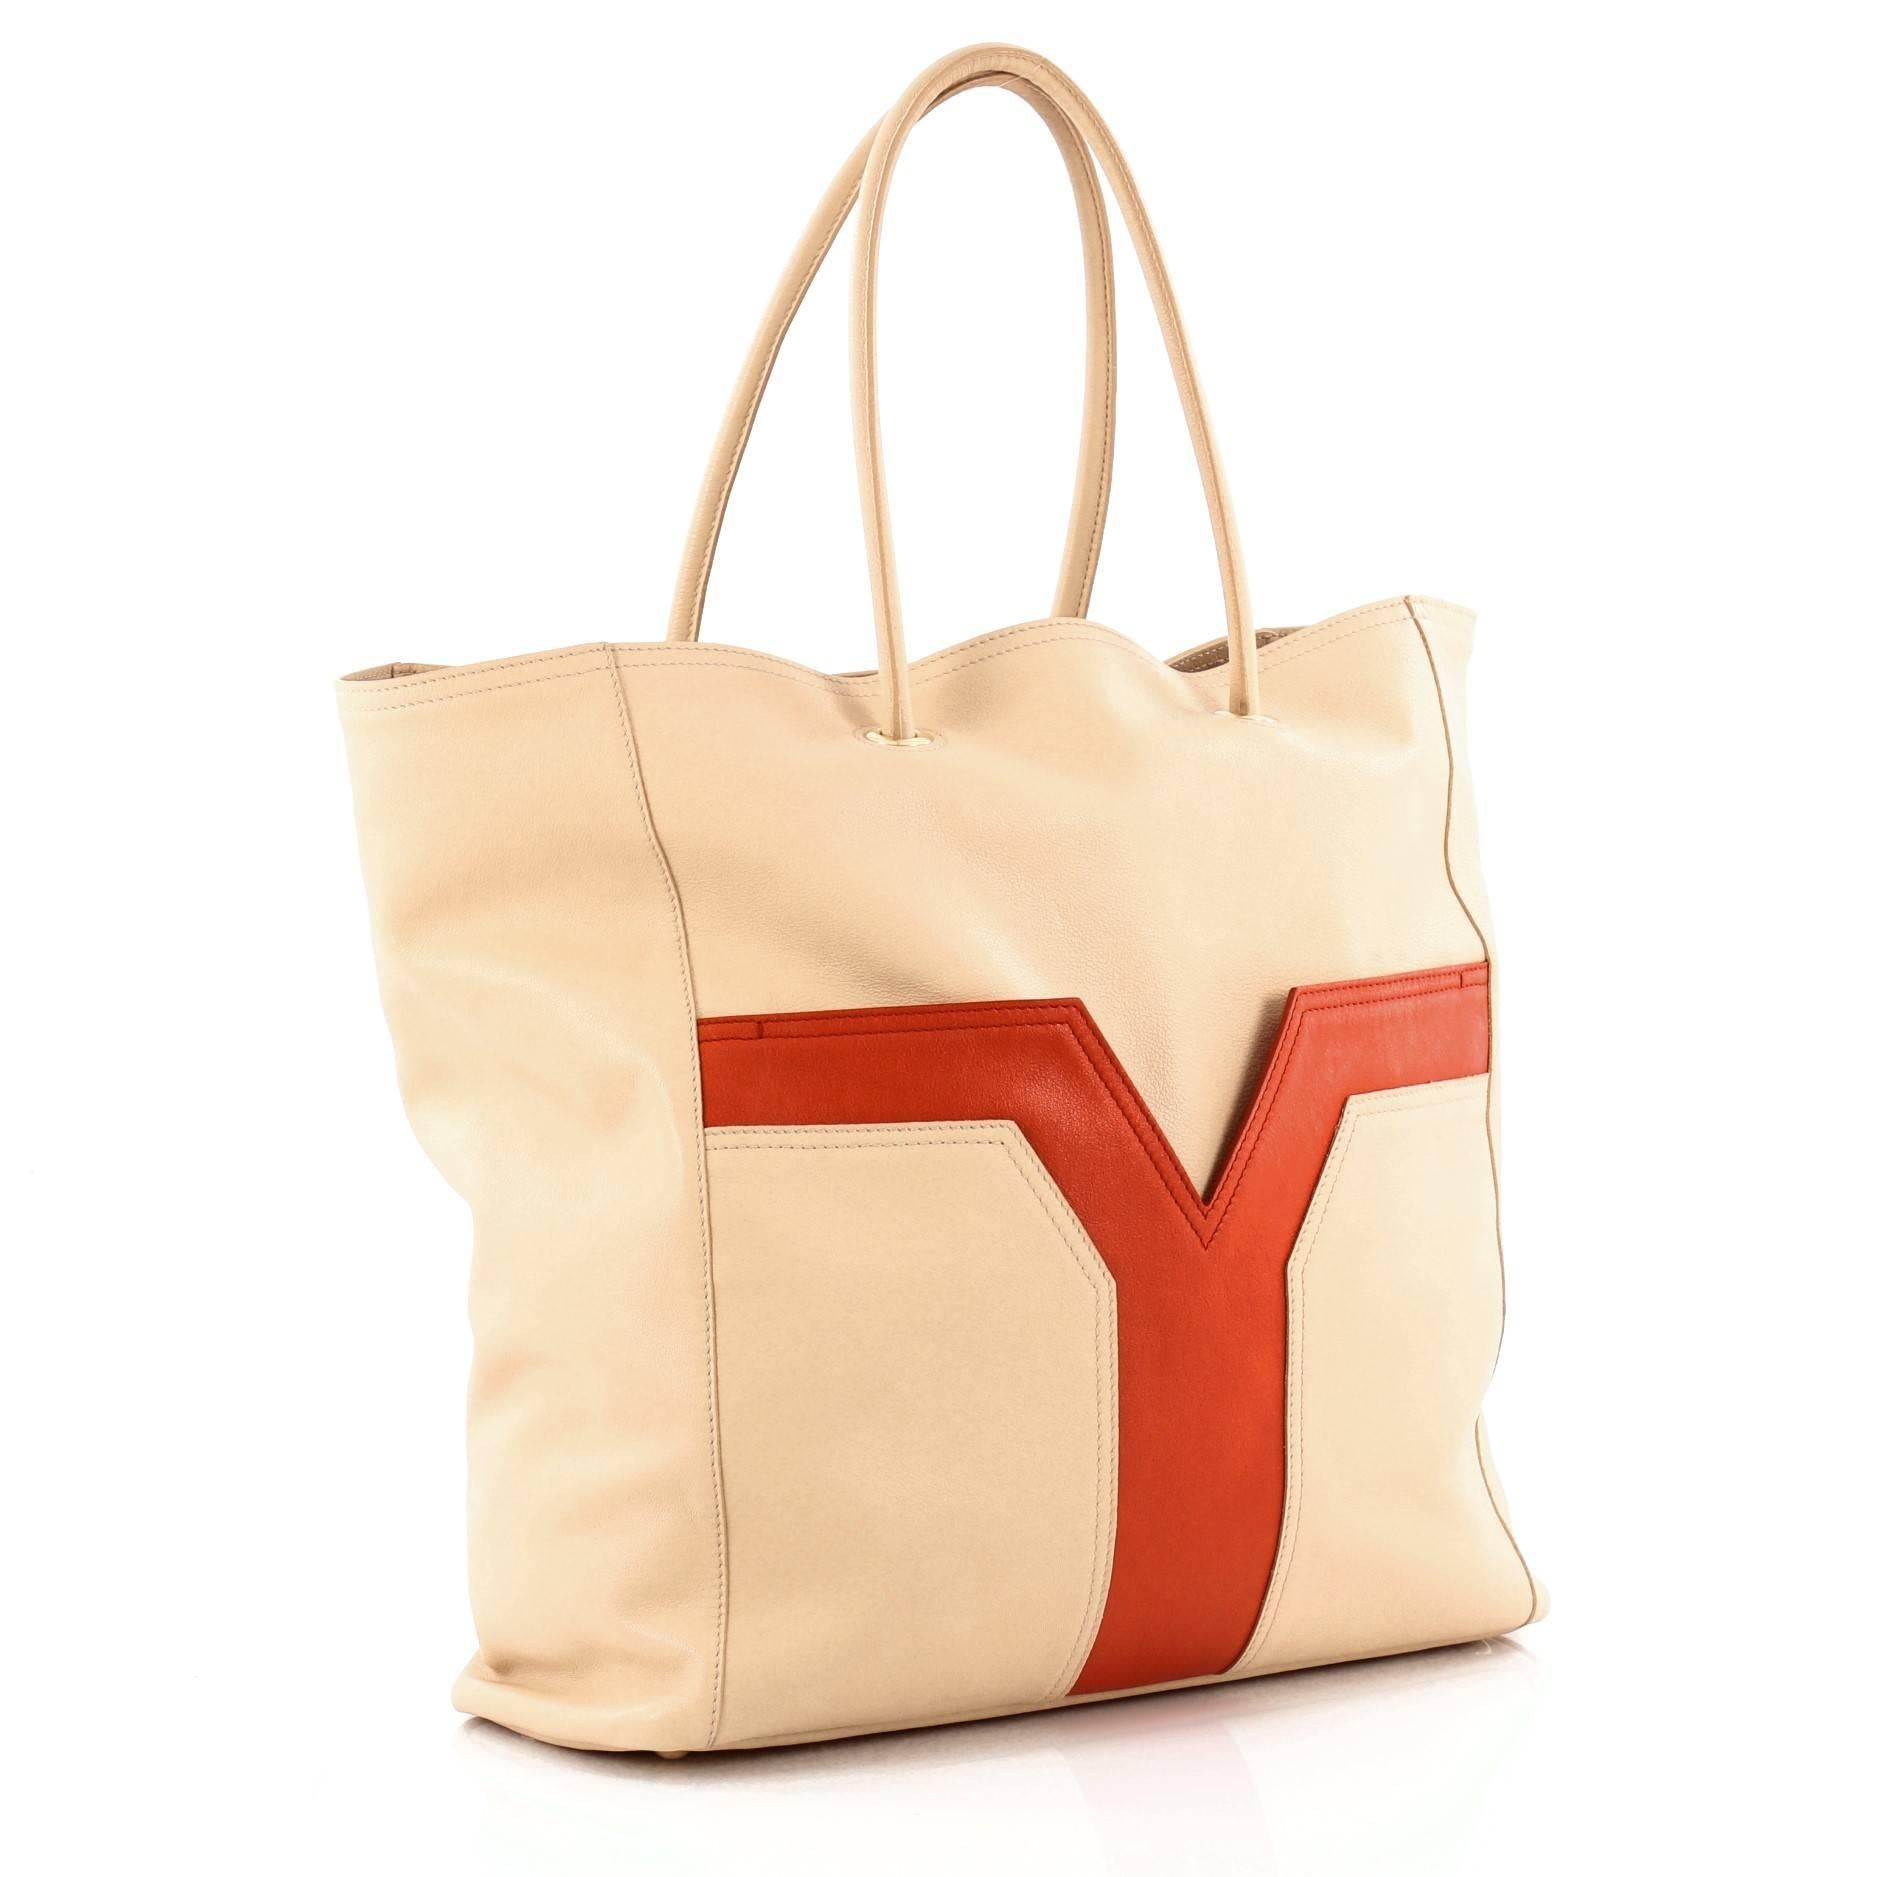 This authentic Saint Laurent Lucky Chyc Tote Leather Medium is a  perfect everyday tote made for serious fashionistas. Crafted from beige leather, this no-fuss shopping tote features dual-rolled leather handles, exterior front pocket with distinct